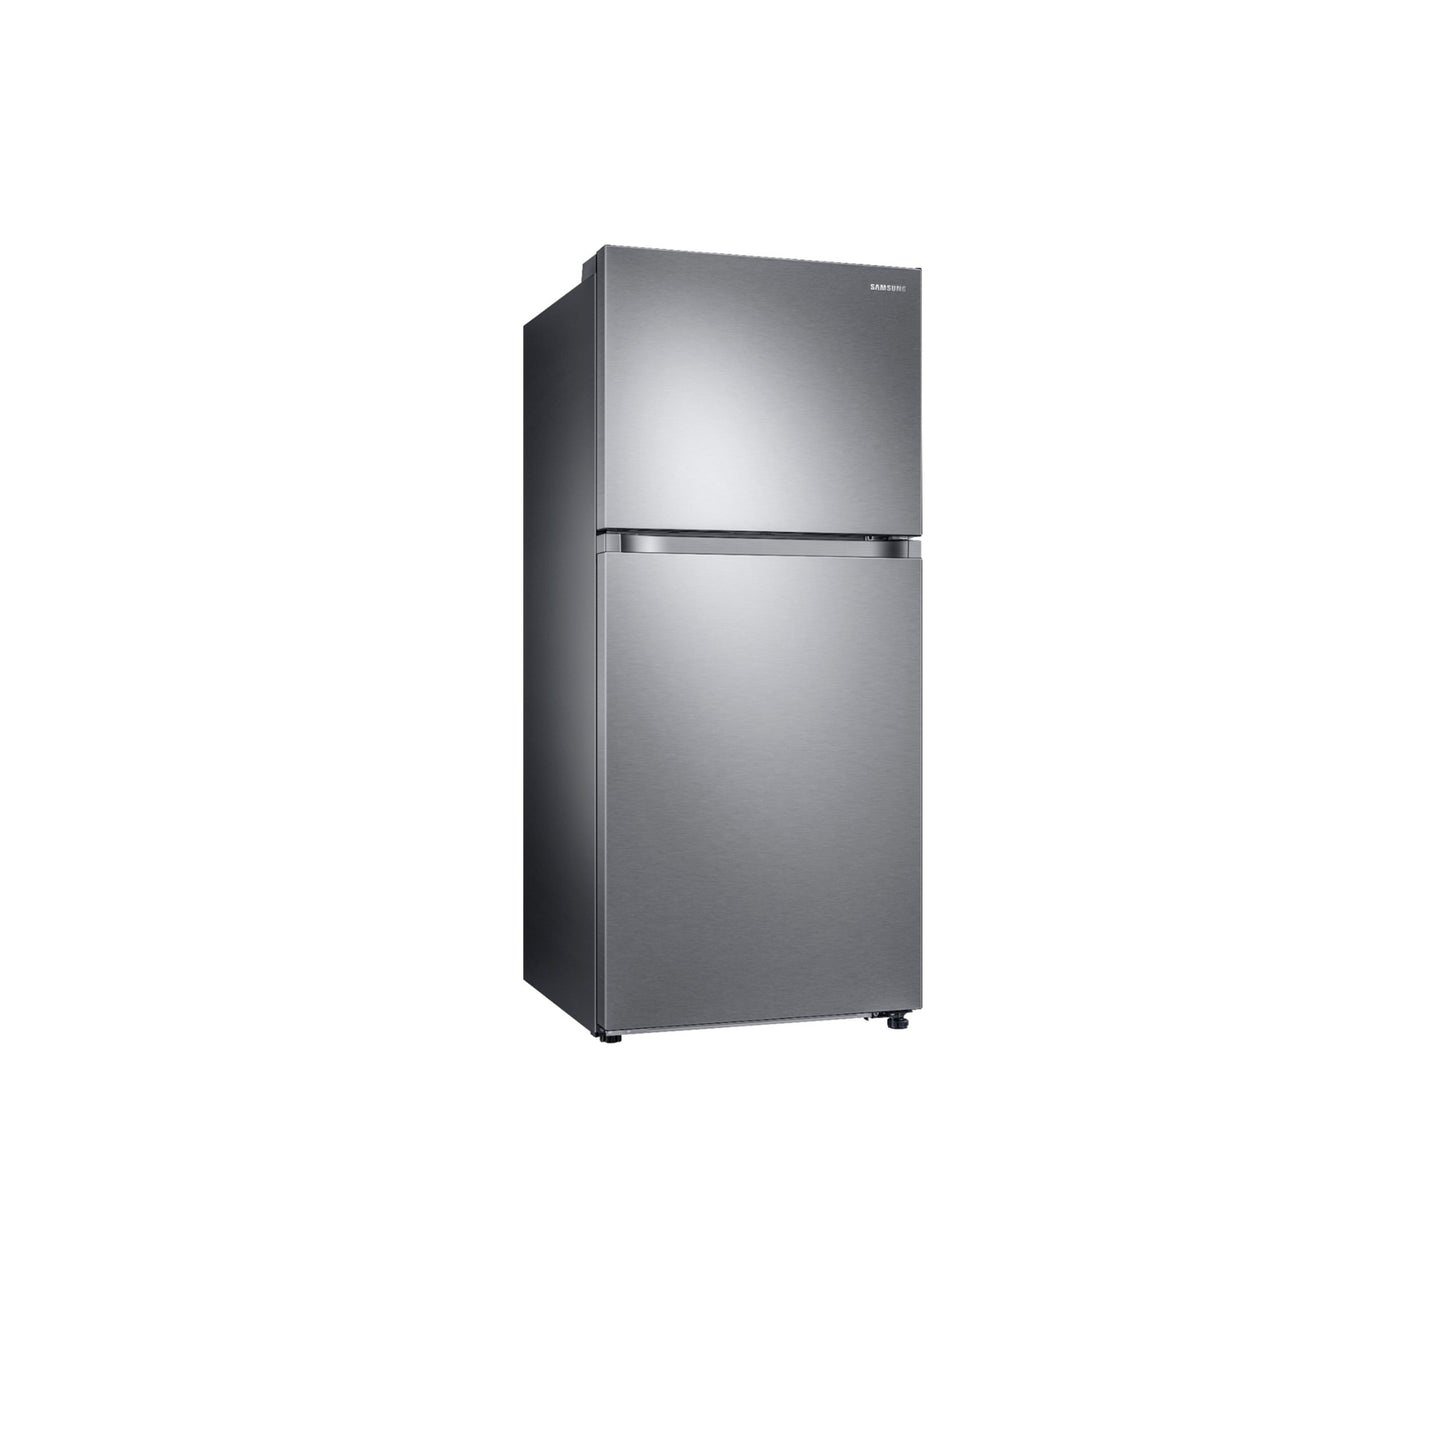 18 cu. ft. Top Freezer Refrigerator with FlexZone™ and Ice Maker in Black Stainless Steel.